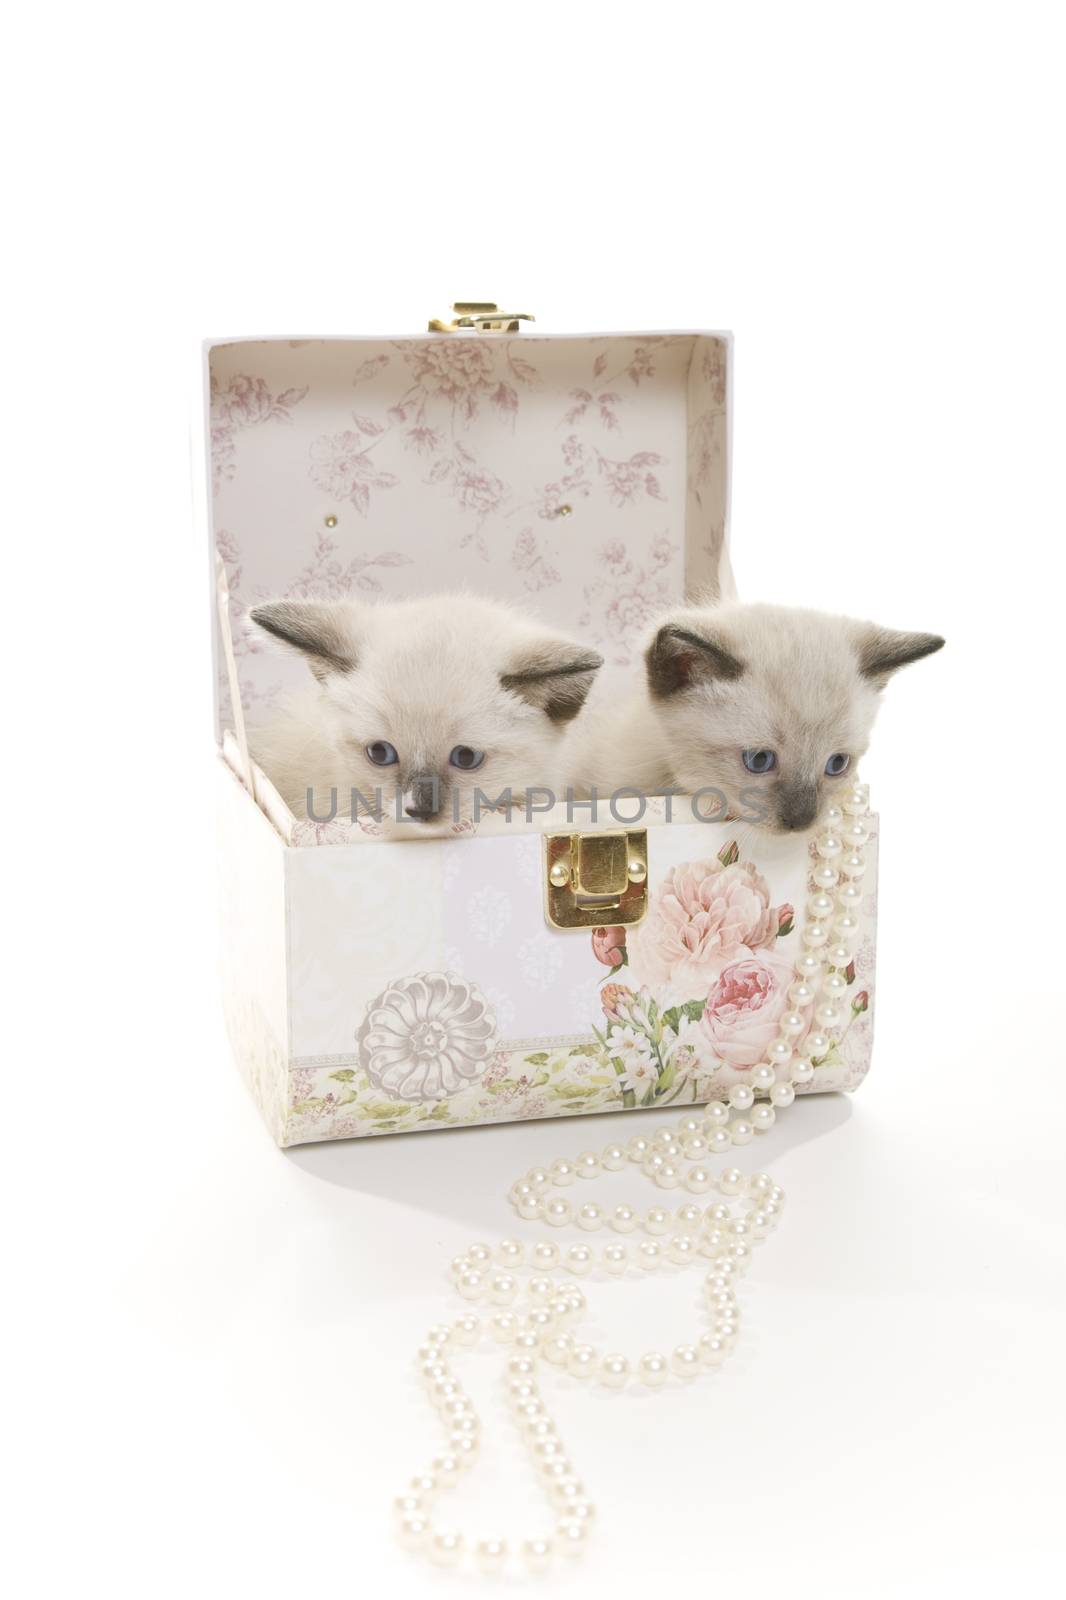 Two three week old Snowshoe Lynx Point Siamese kittens in a jewelery box.